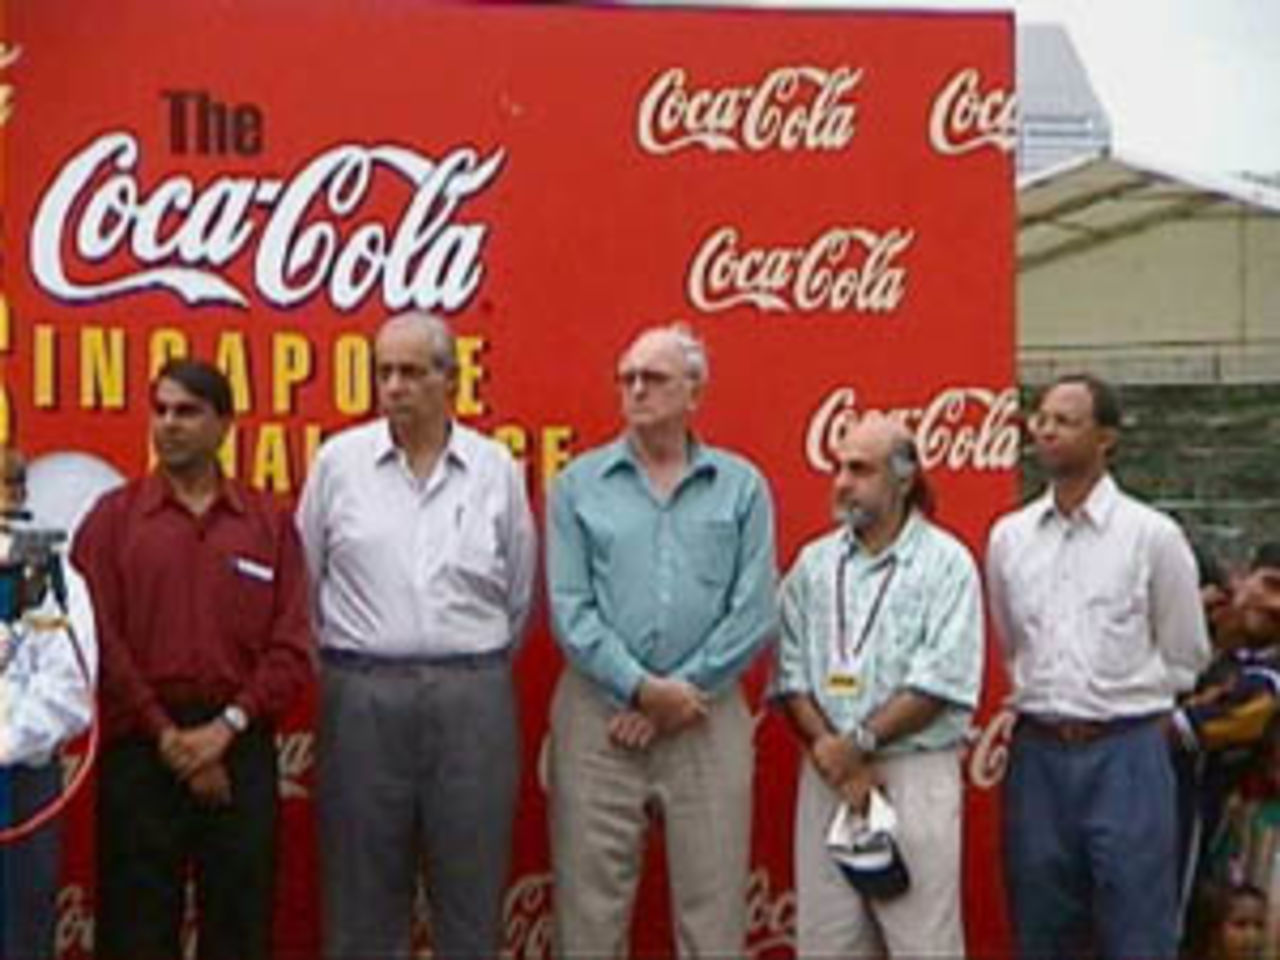 The cricket board chiefs - BCCI's Raj Singh Dungarpur and ZCU's David Ellman-Brown on the podium (2nd and 3rd from the left), India v Zimbabwe (2nd ODI), Coca-Cola Singapore Challenge, 1999-2000, Kallang Ground, Singapore, 4 Sep 1999